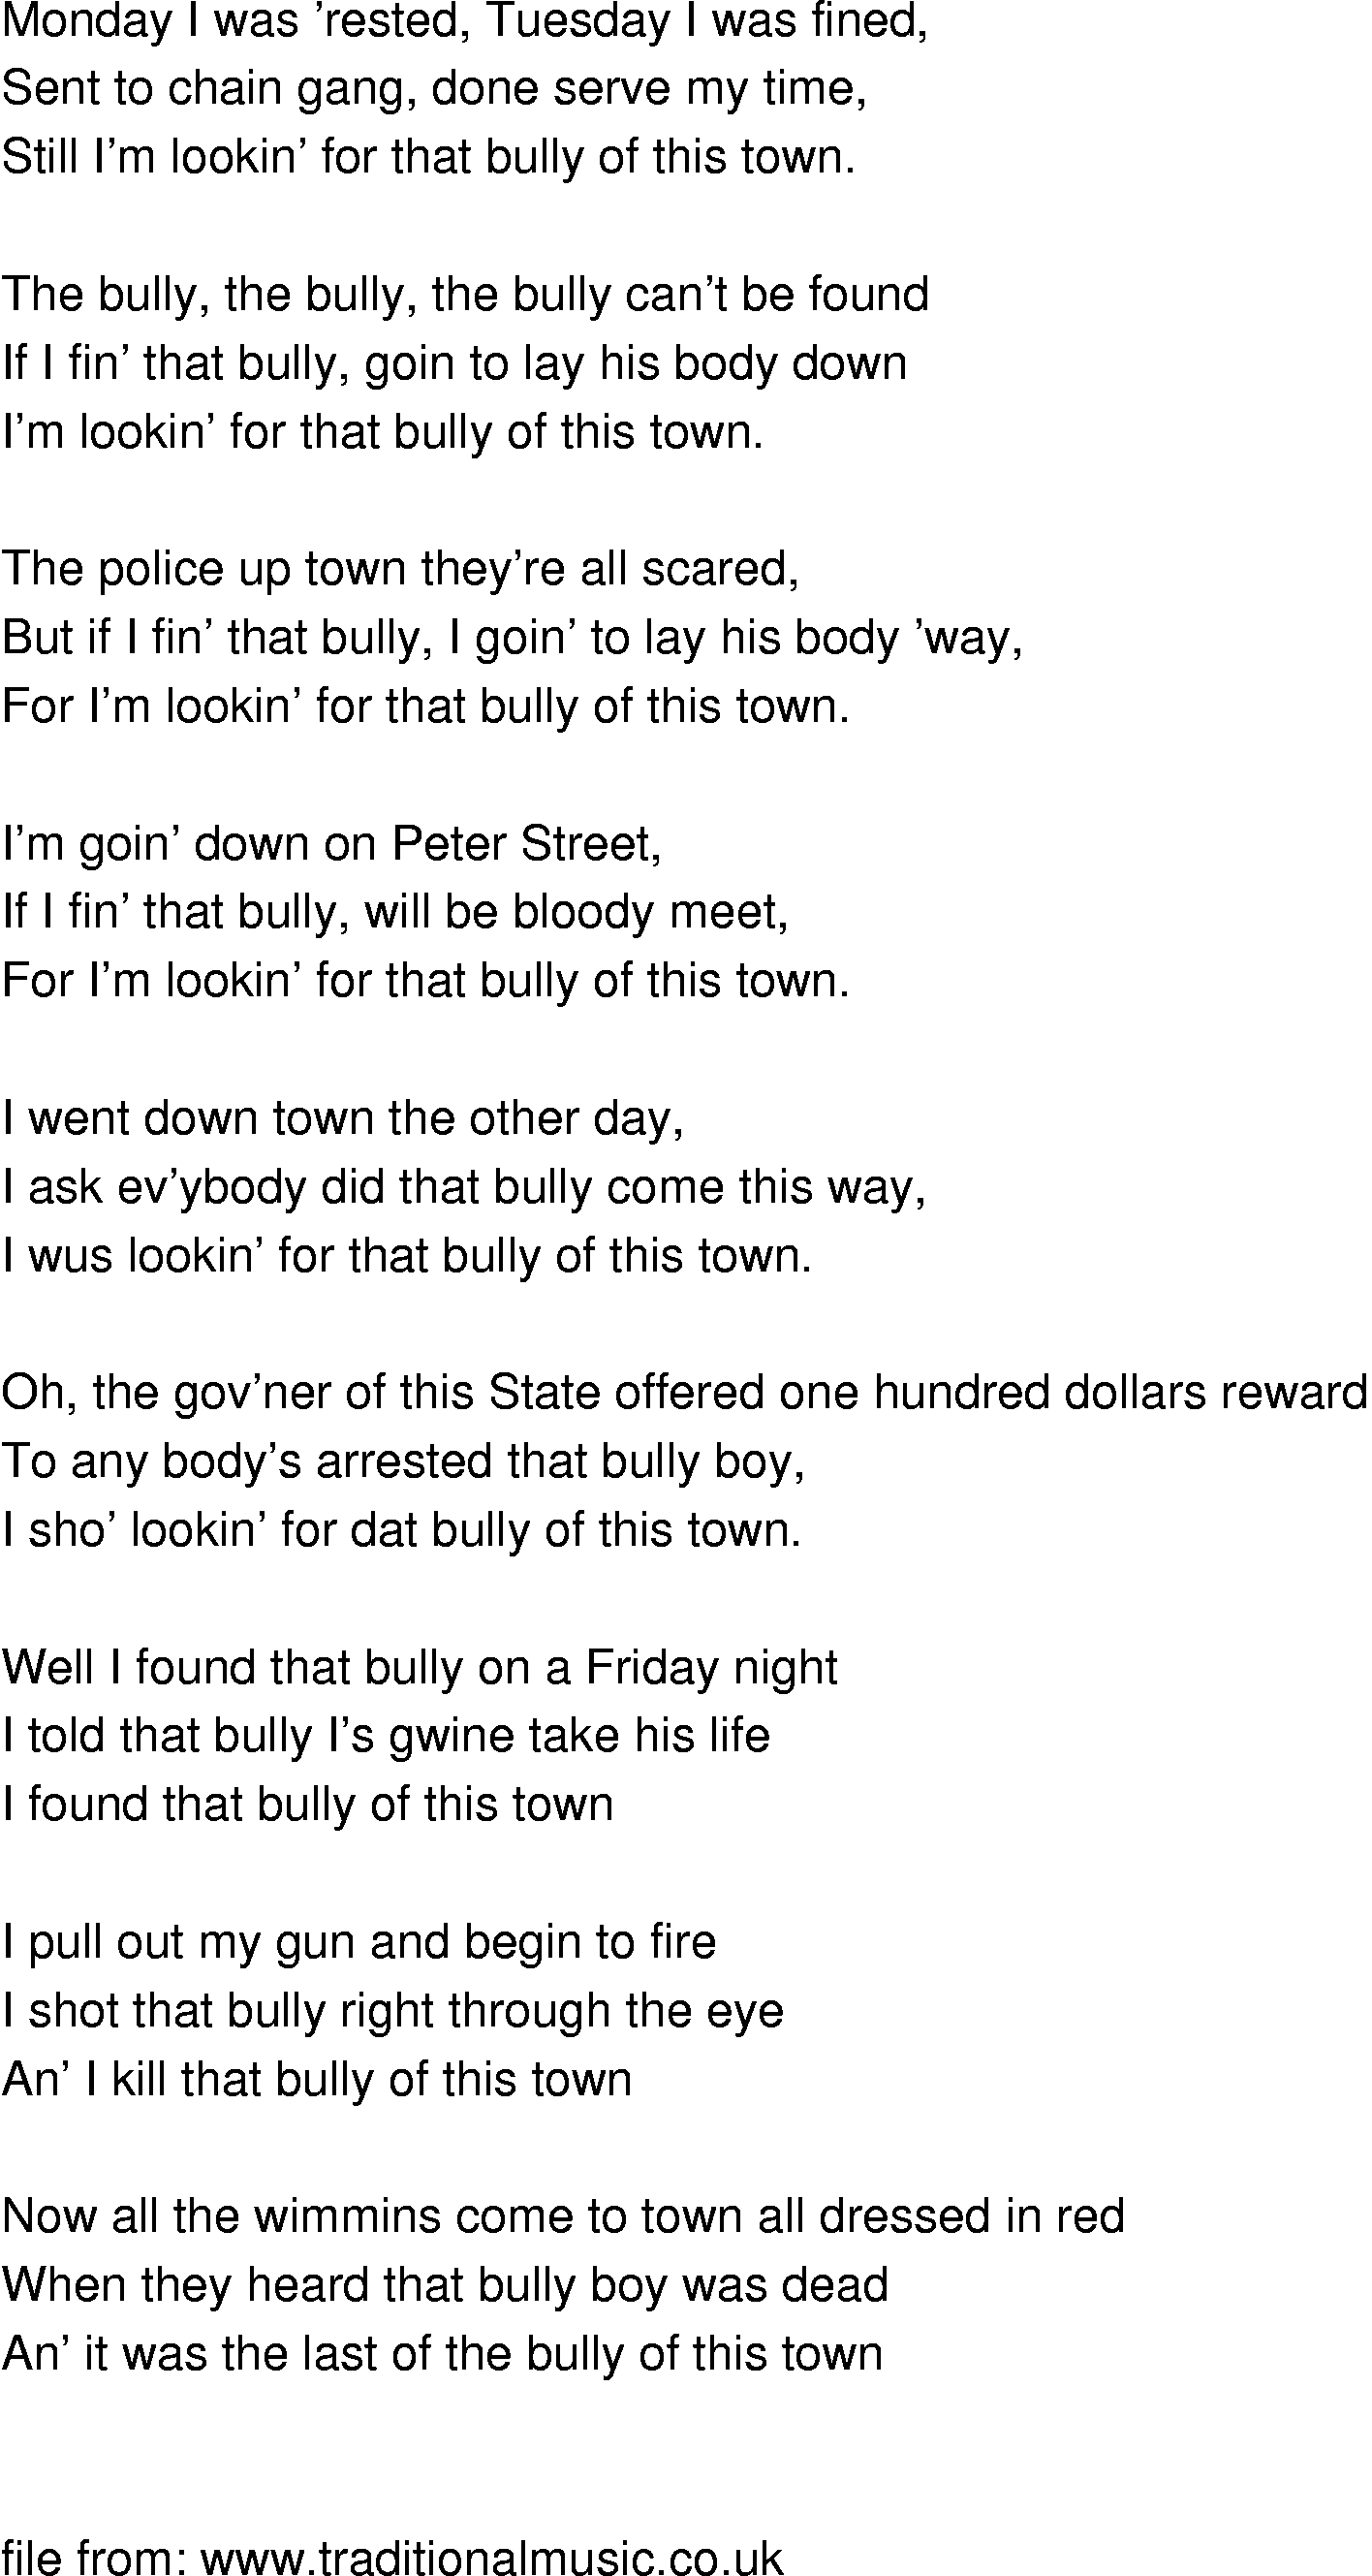 Old-Time (oldtimey) Song Lyrics - bully of the town